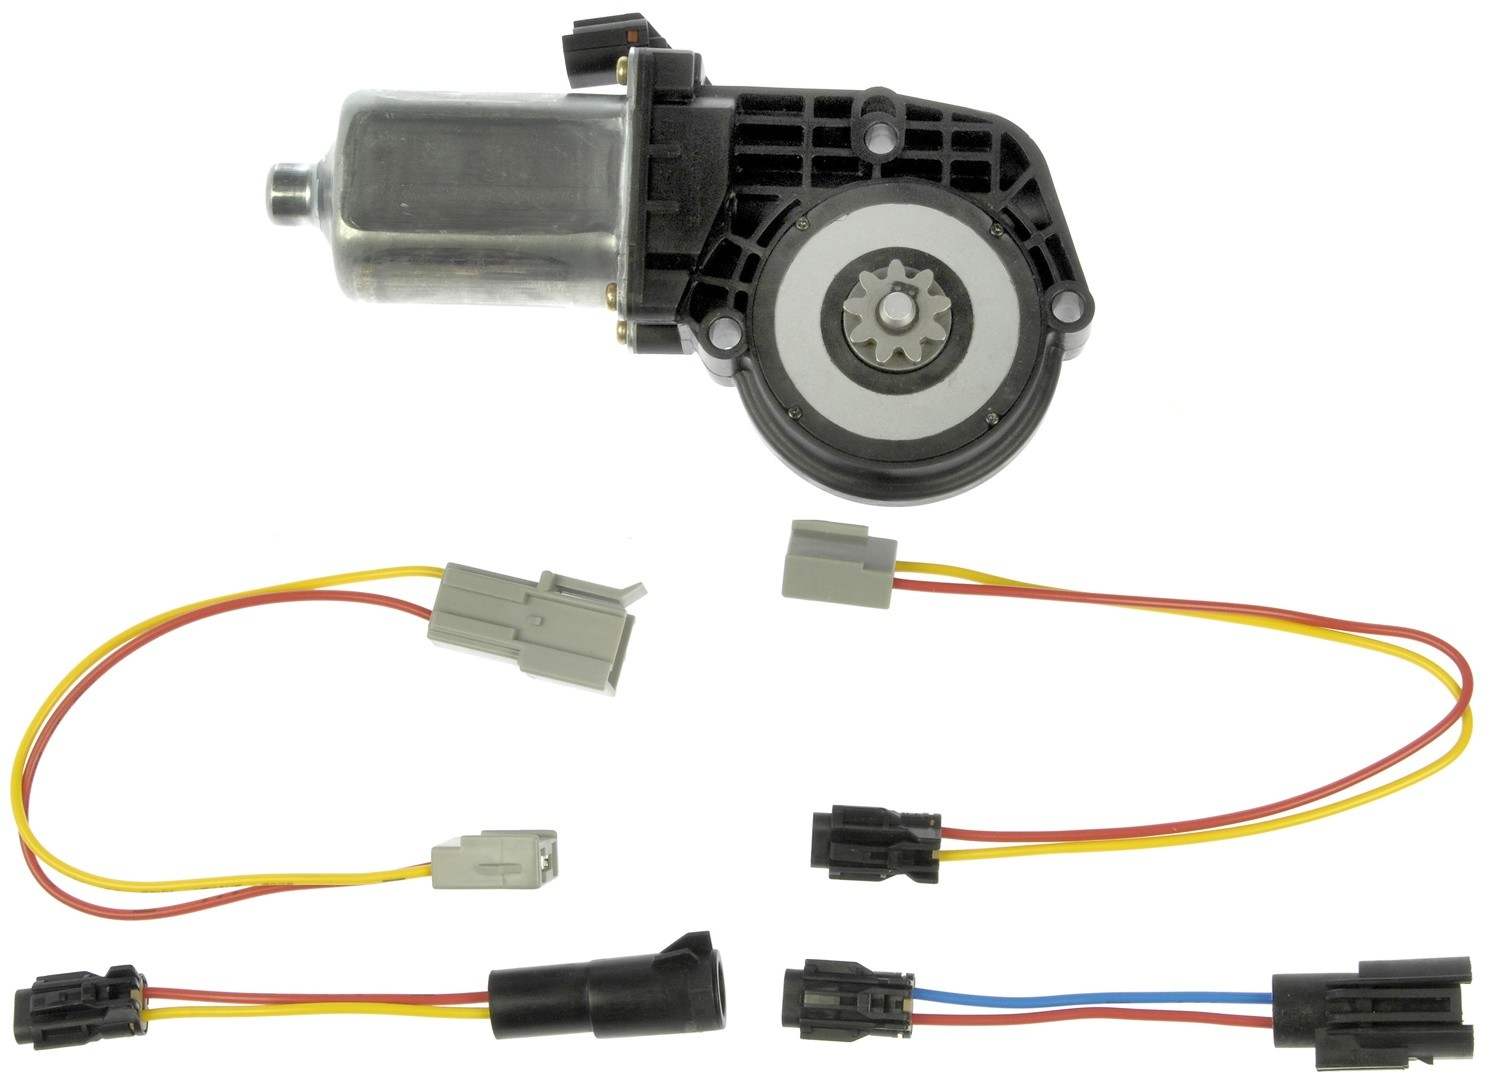 2003 Ford explorer window motor replacement